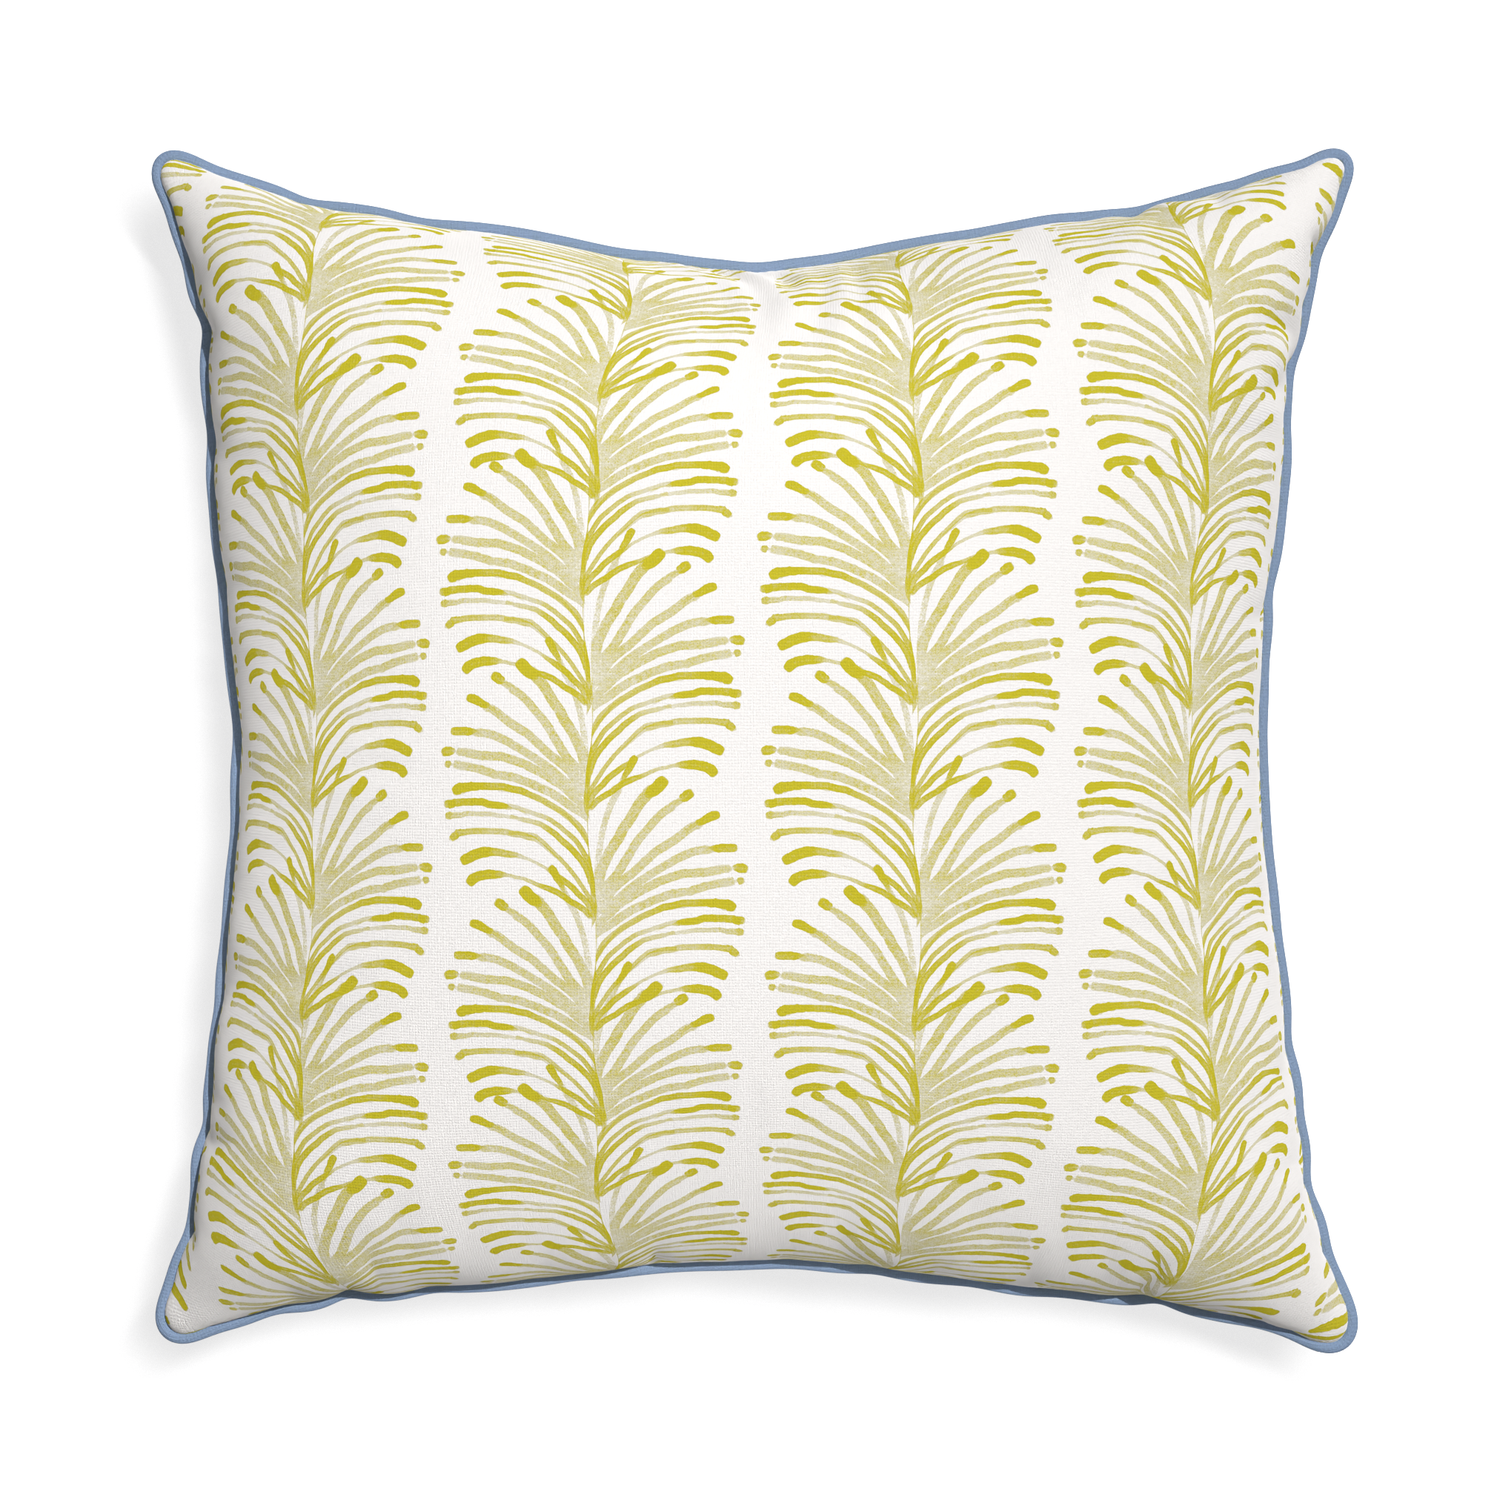 Euro-sham emma chartreuse custom yellow stripe chartreusepillow with sky piping on white background